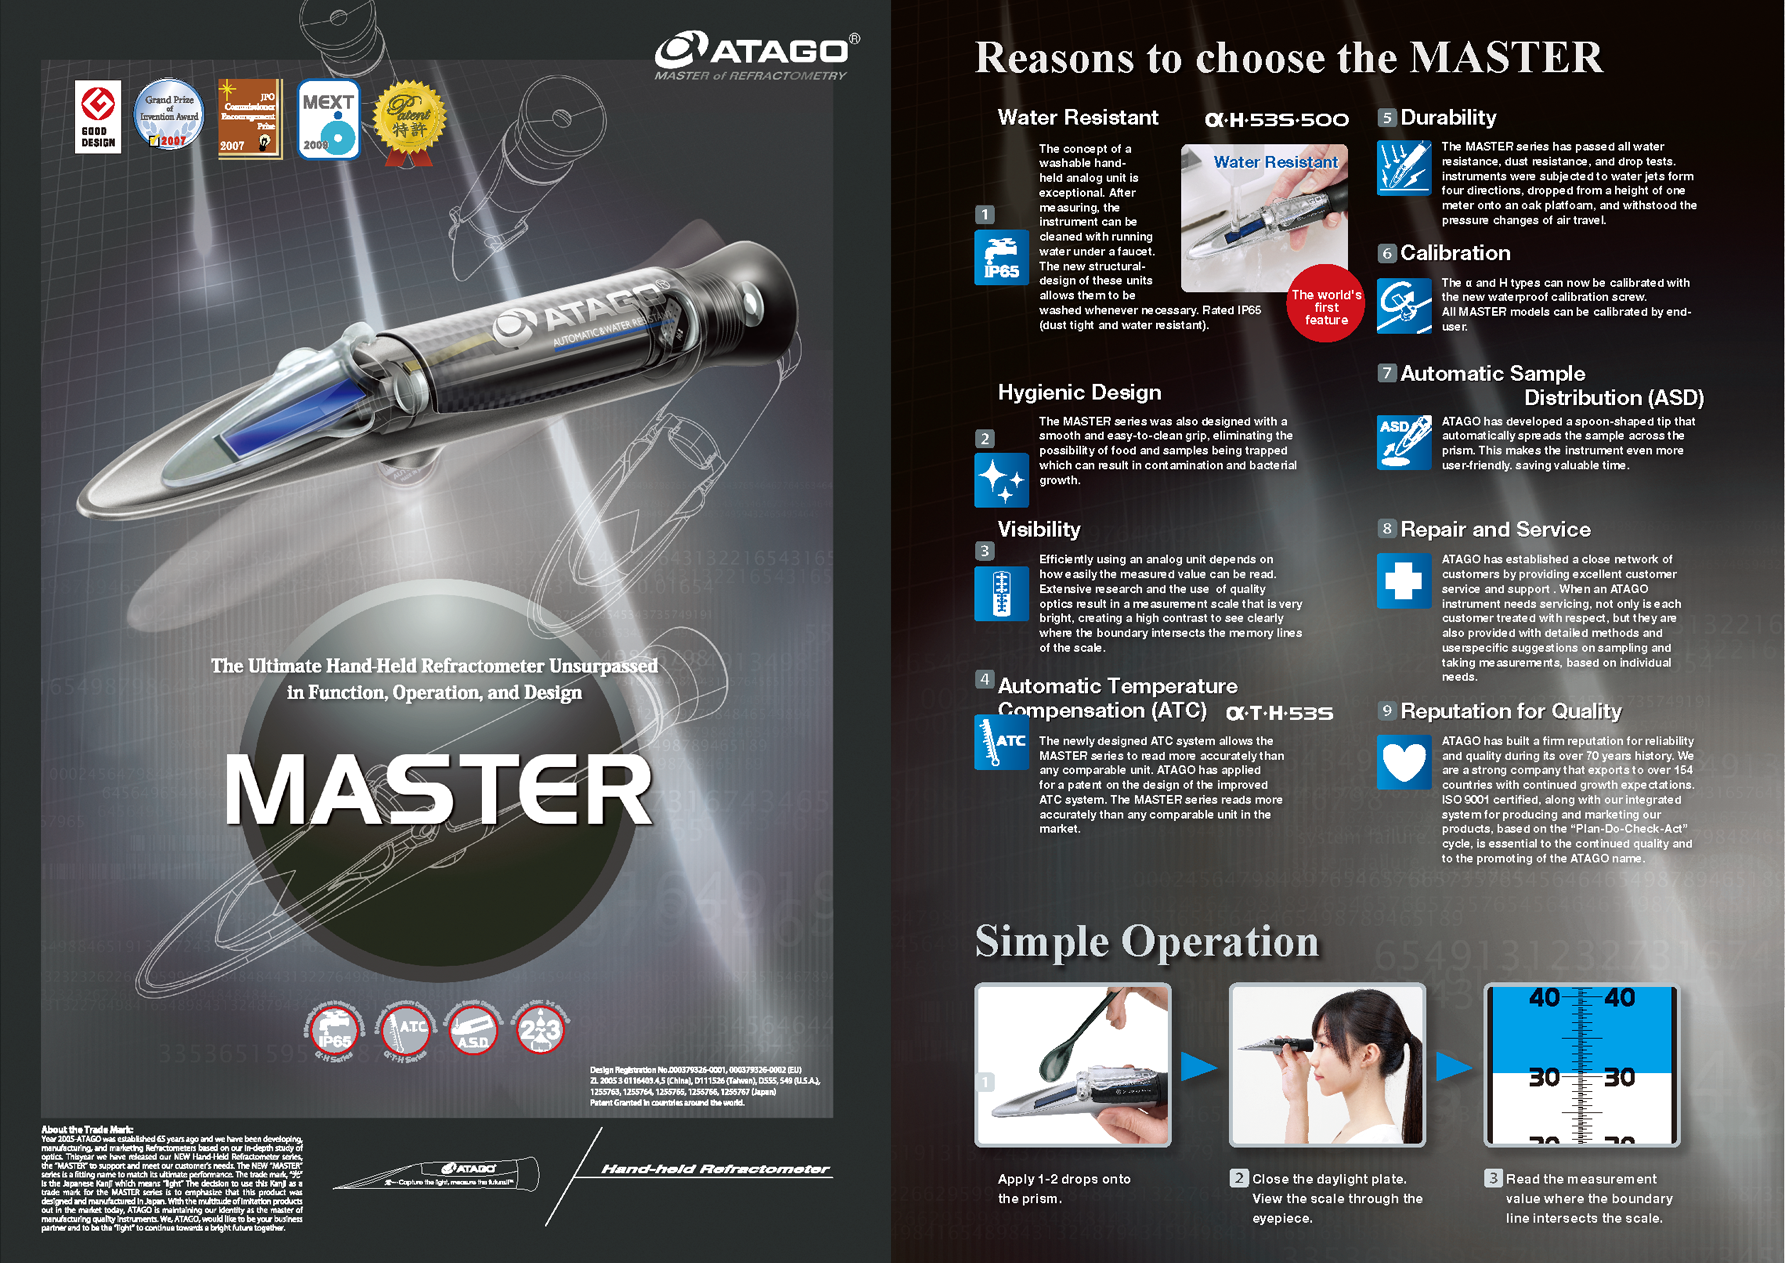 MASTER / Reasons to choose the MASTER